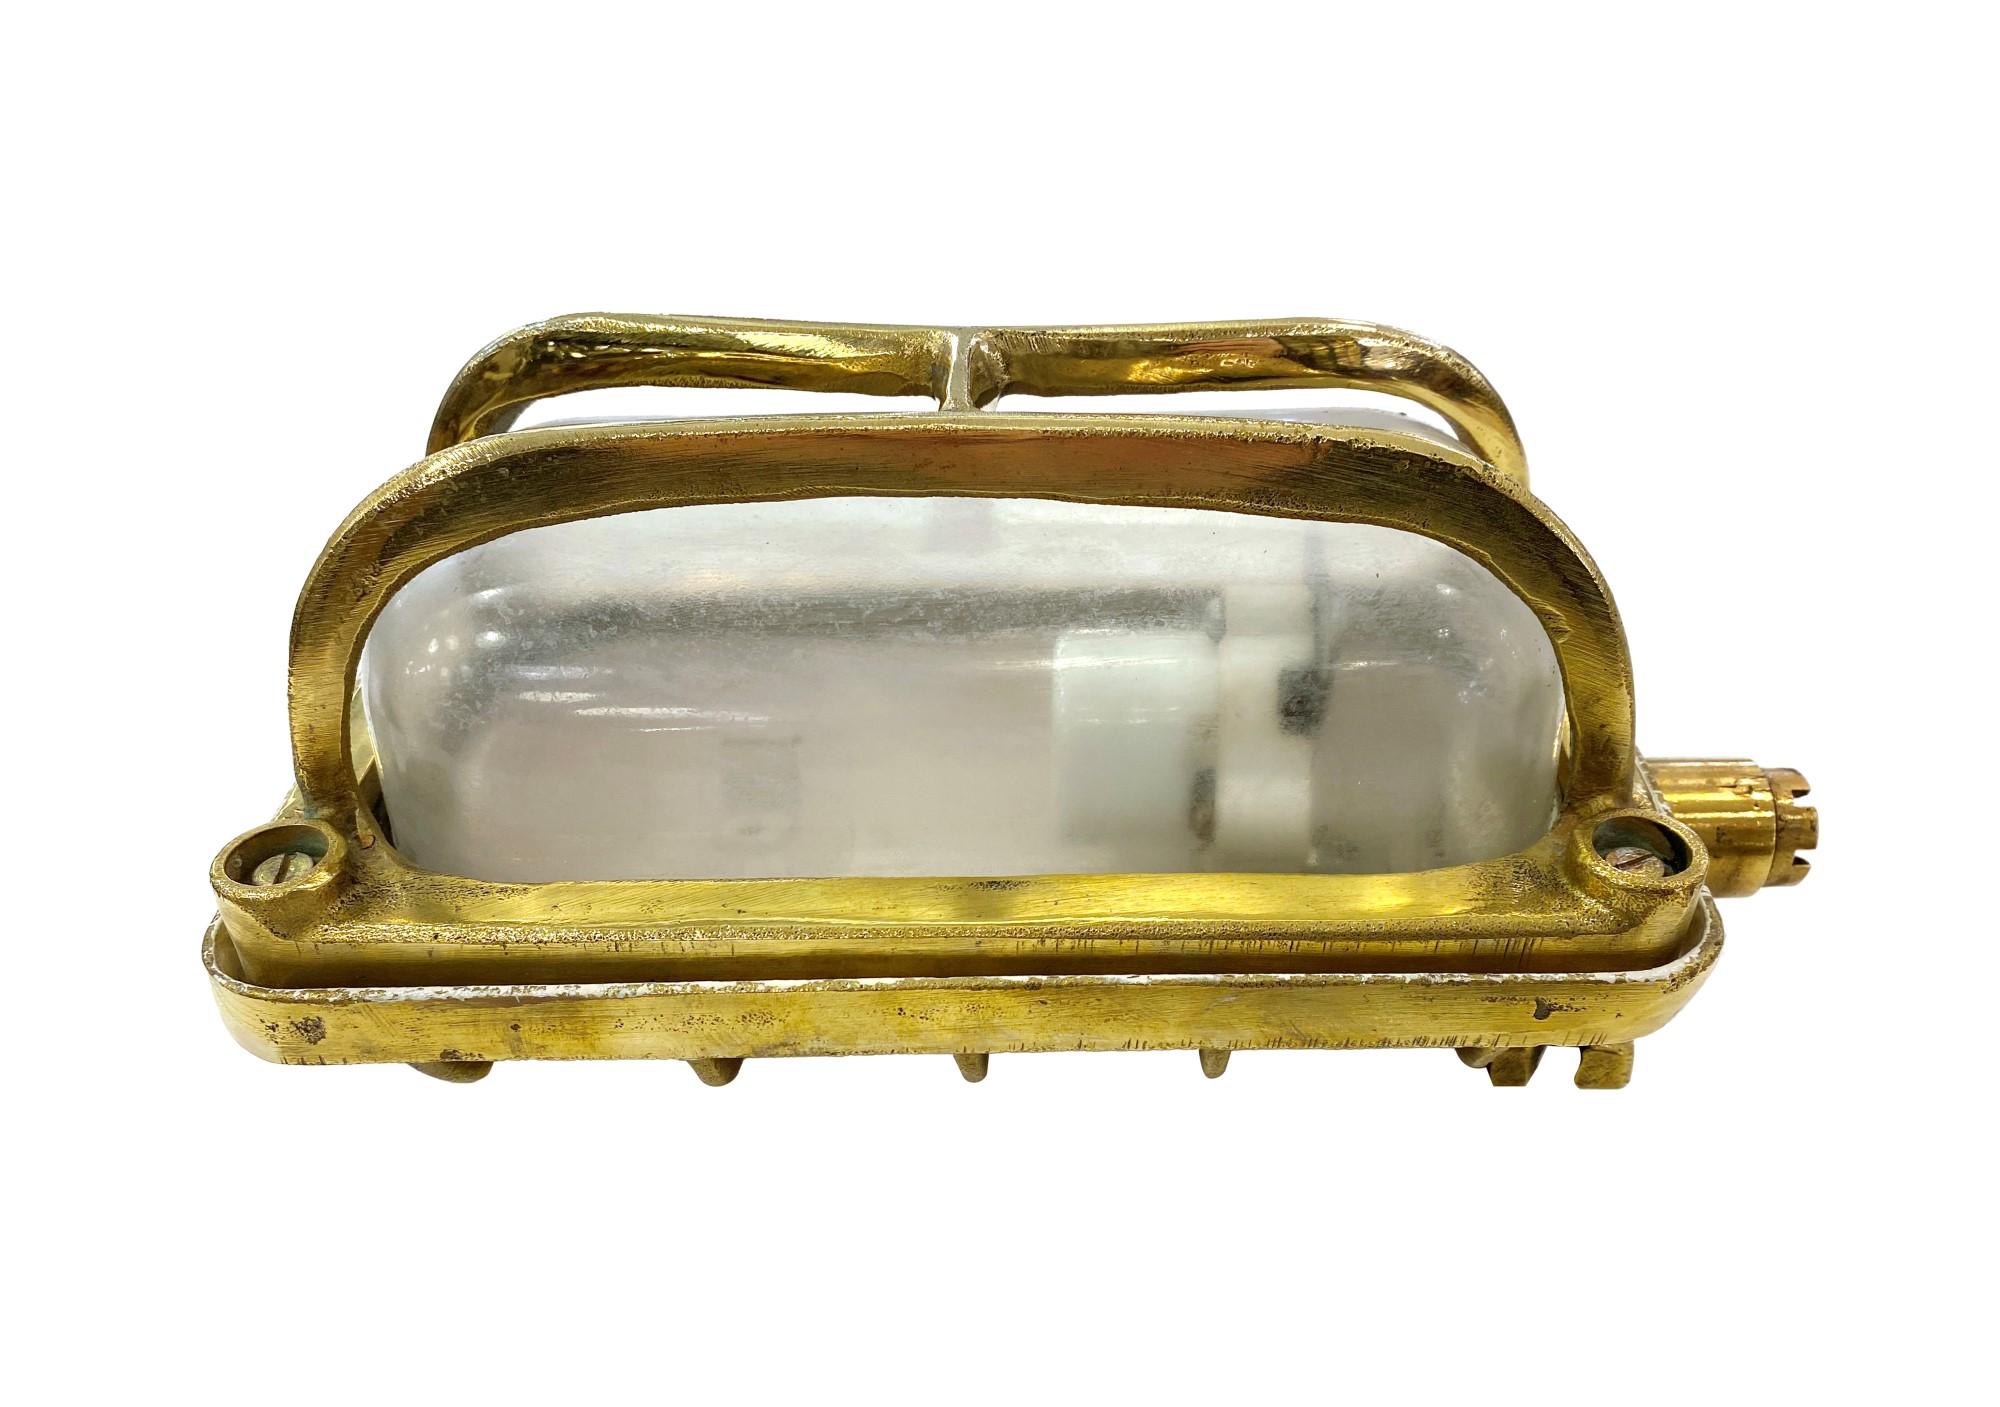 Industrial Brass Nautical Ship Sconce Light Rectangular Qty Available Bulkhead Style For Sale